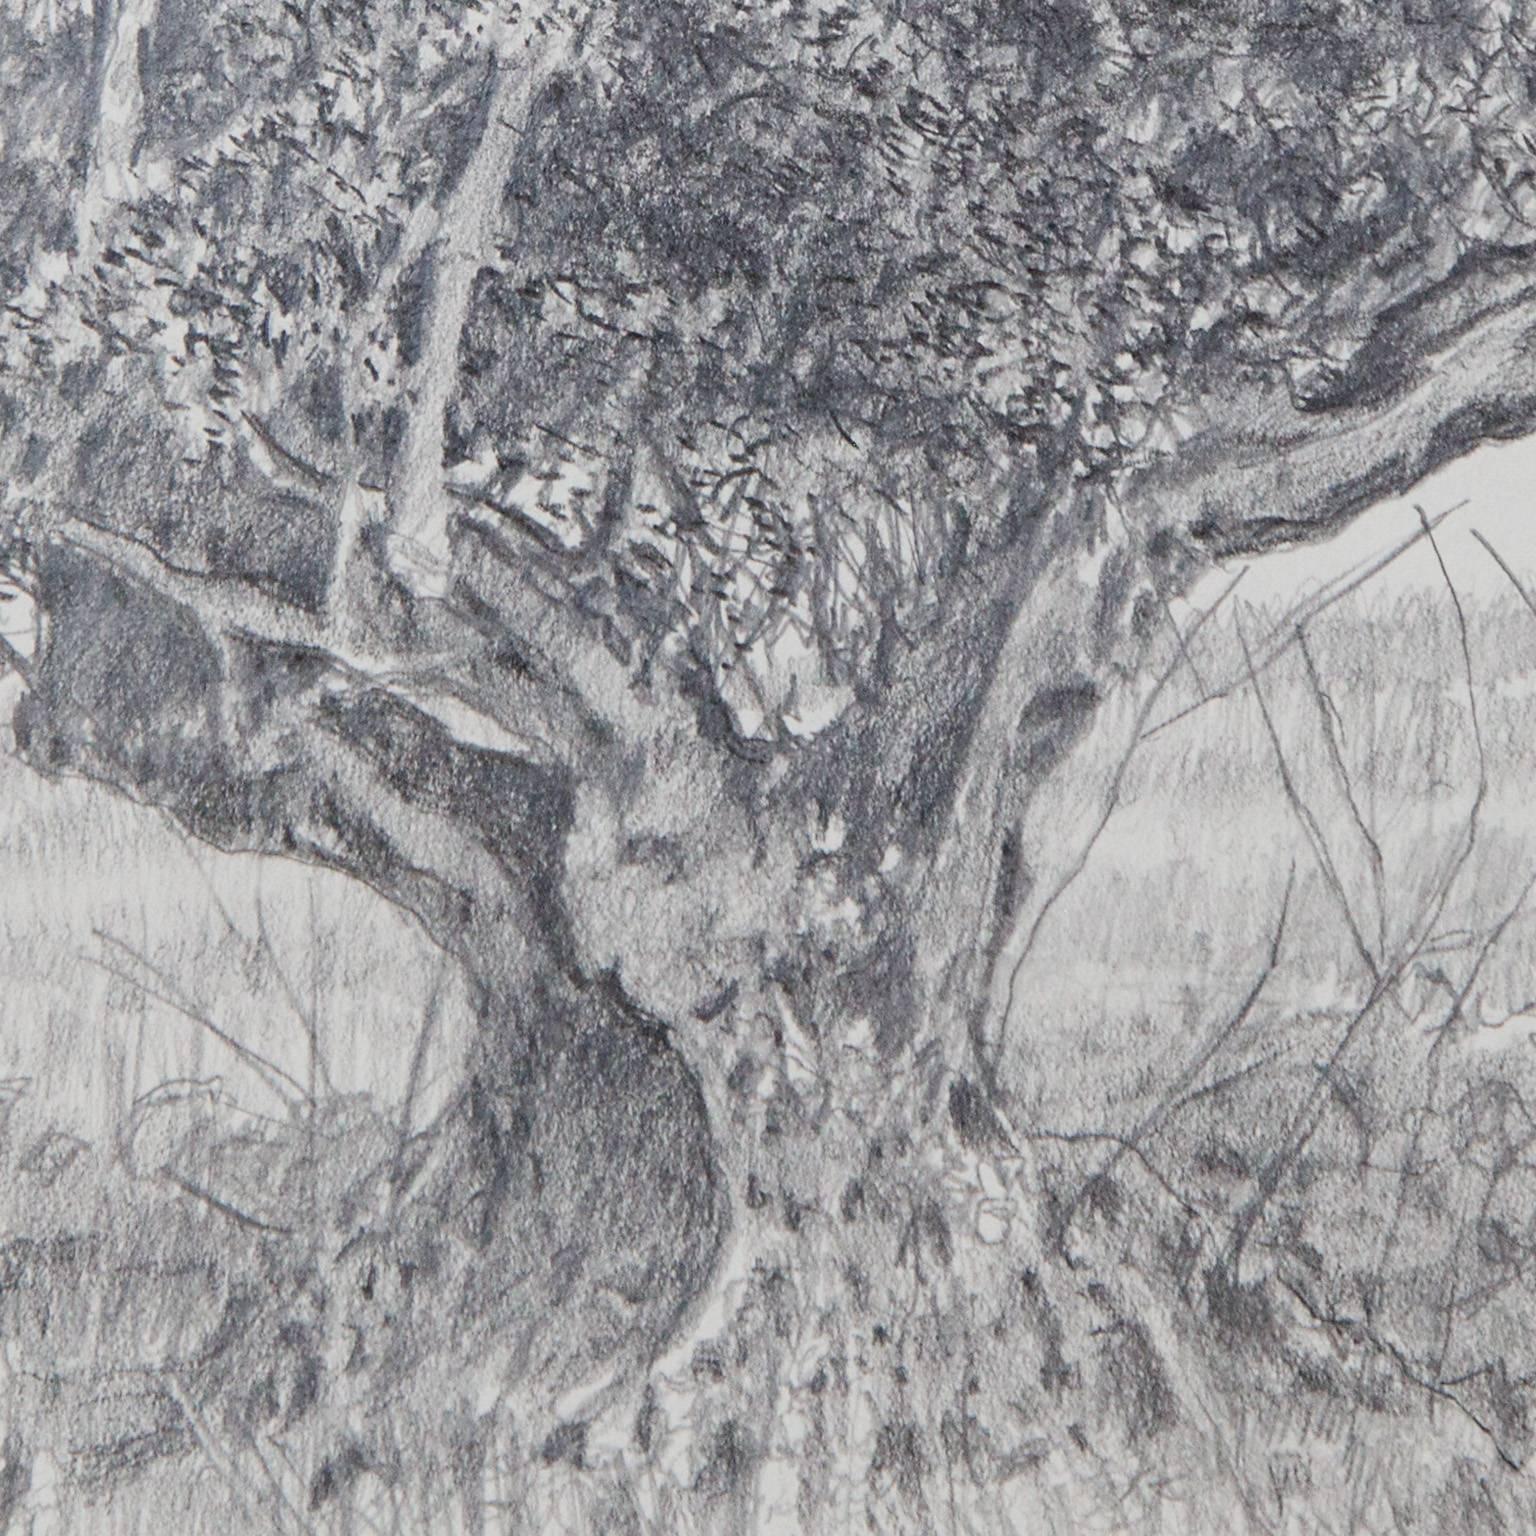 Olive Tree - Realist Art by George Tzannes